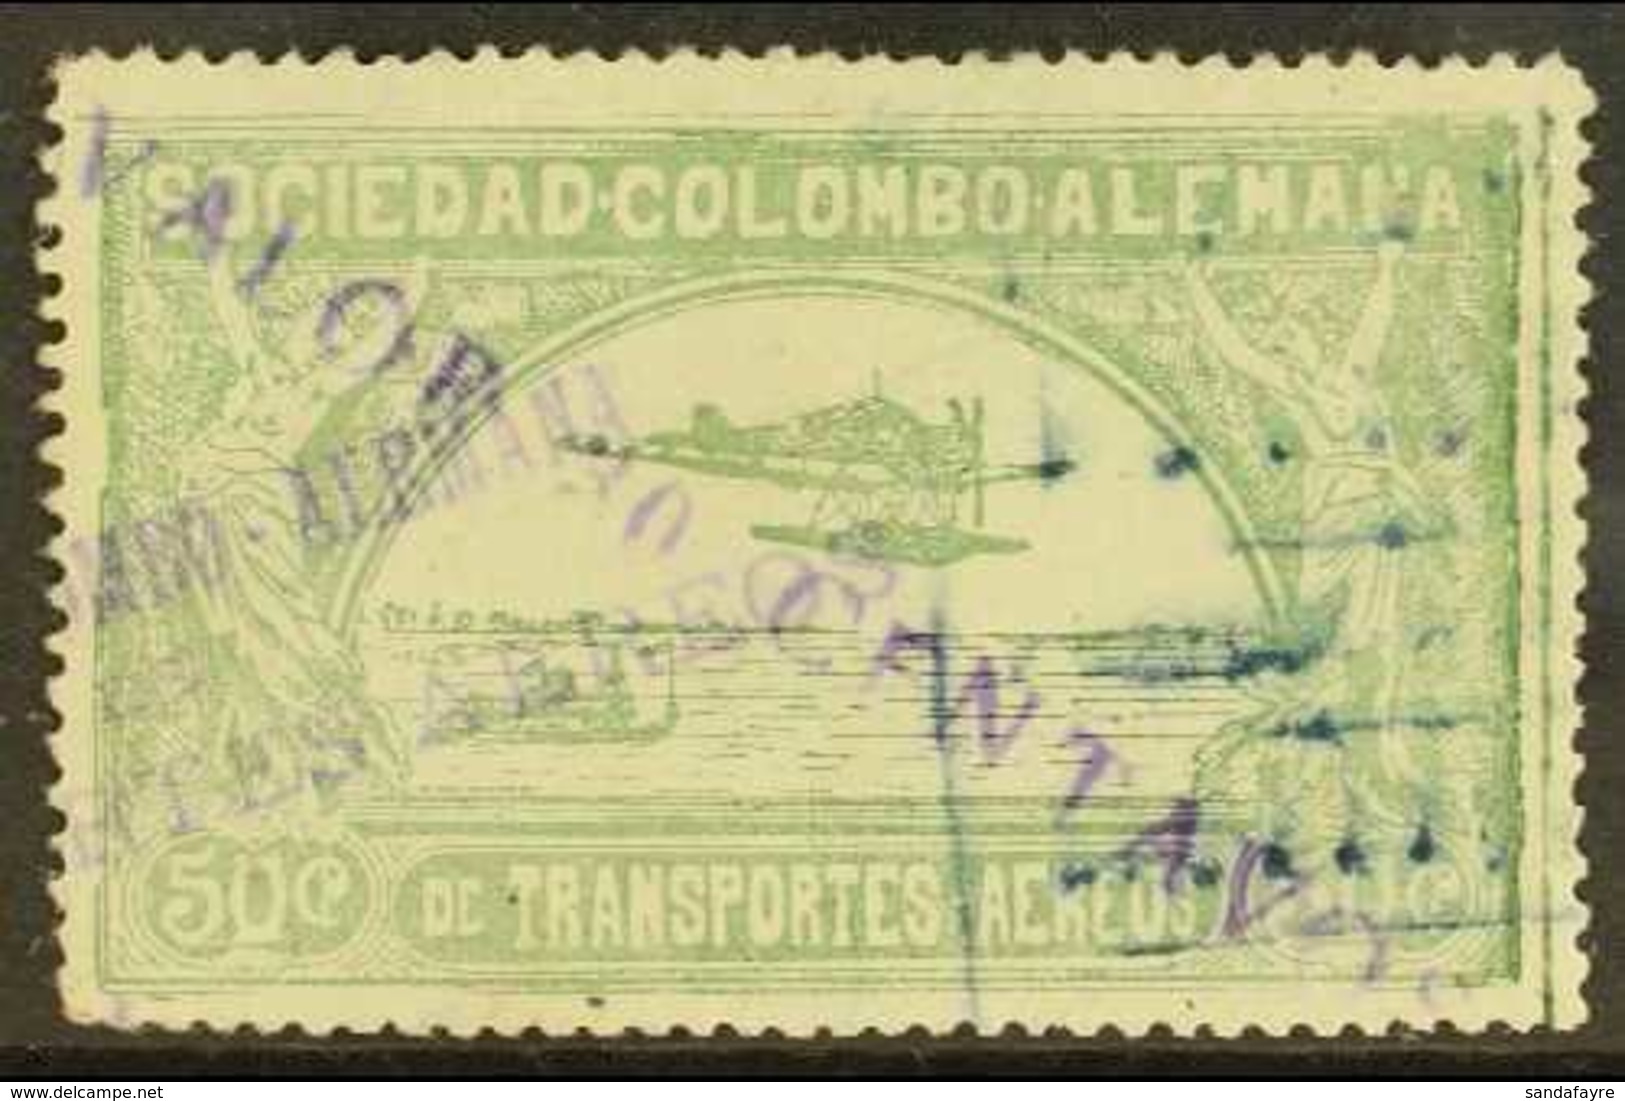 SCADTA 1921 30c On 50c Dull Green Surcharge In Violet, Scott C20 (SG 7, Michel 8 II), Fine Used, Expertized A.Brun, Fres - Colombia